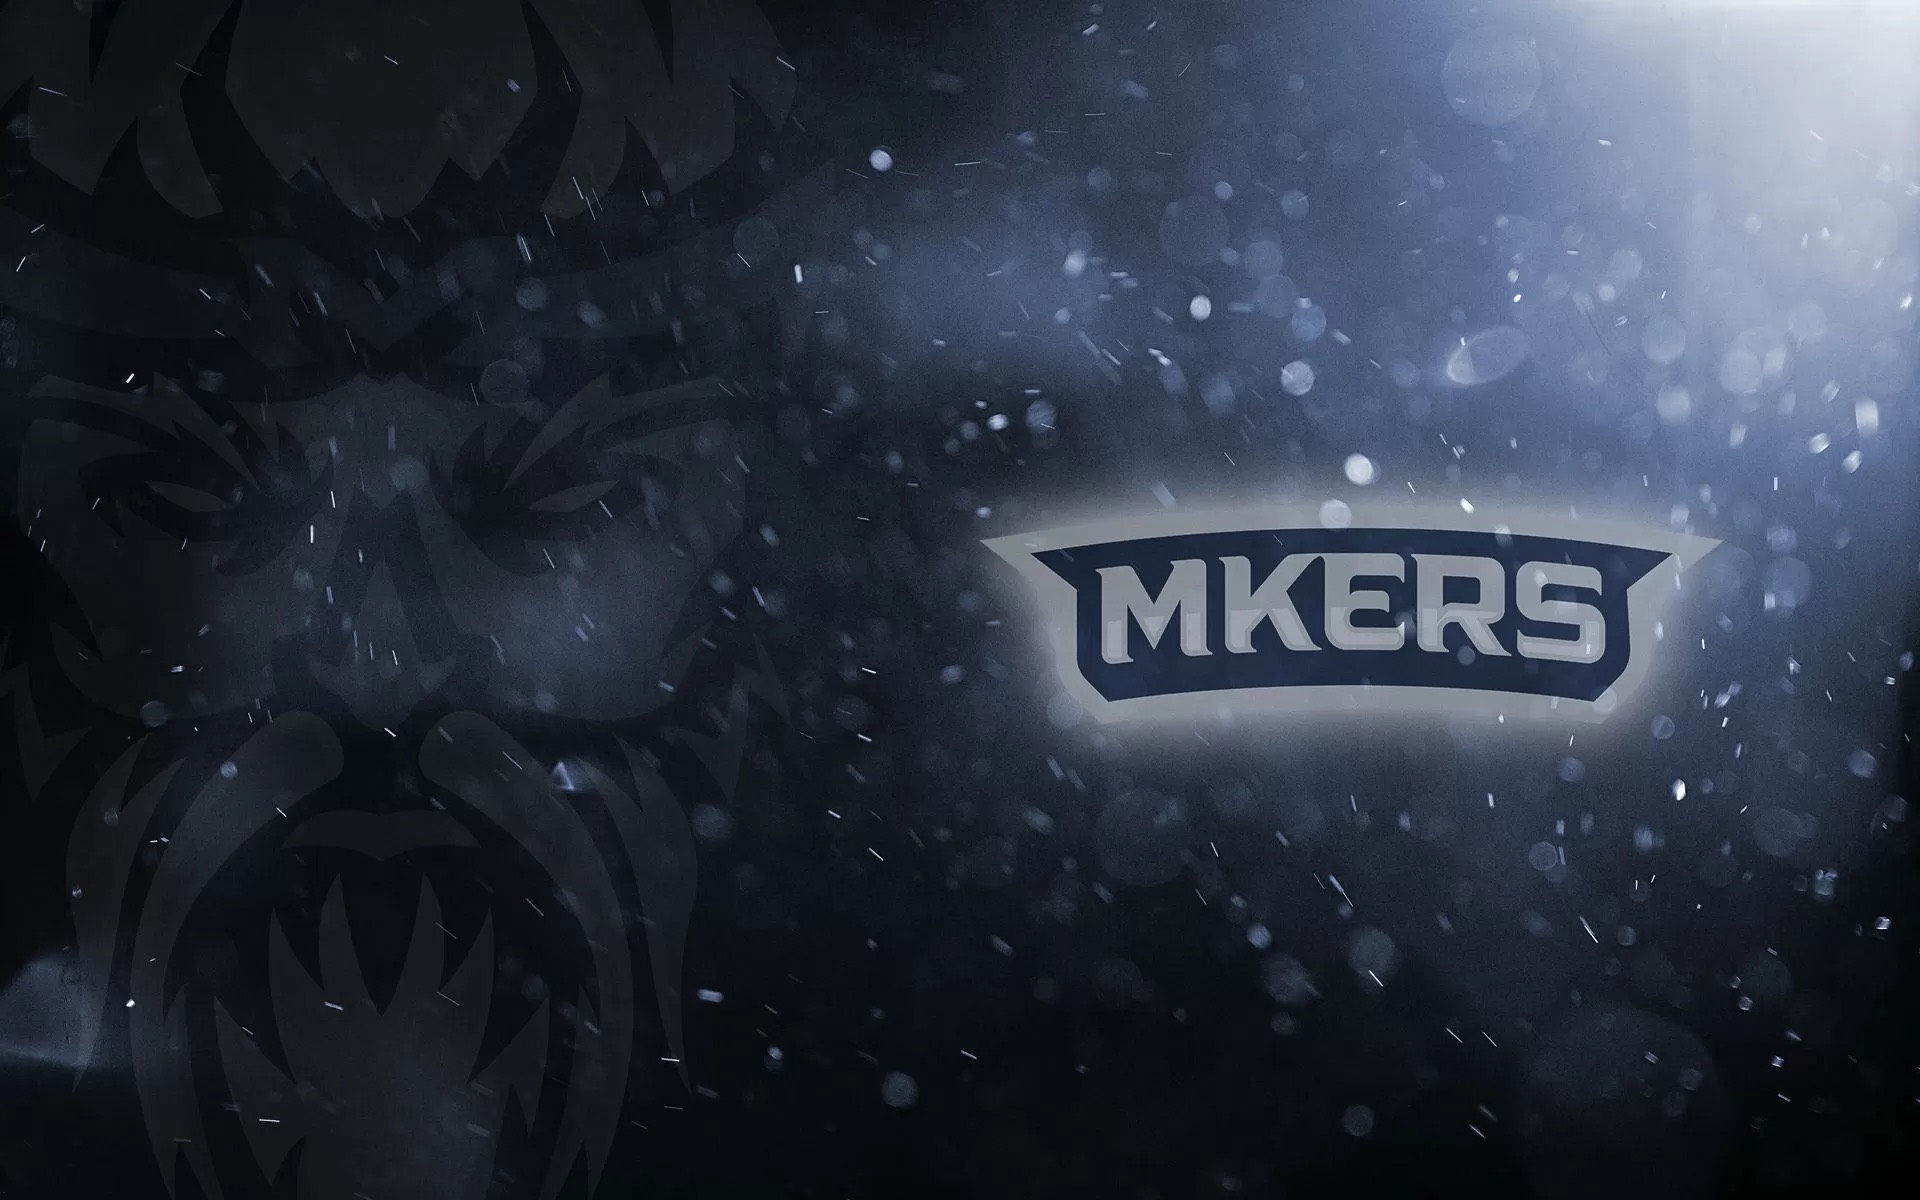 Mkers